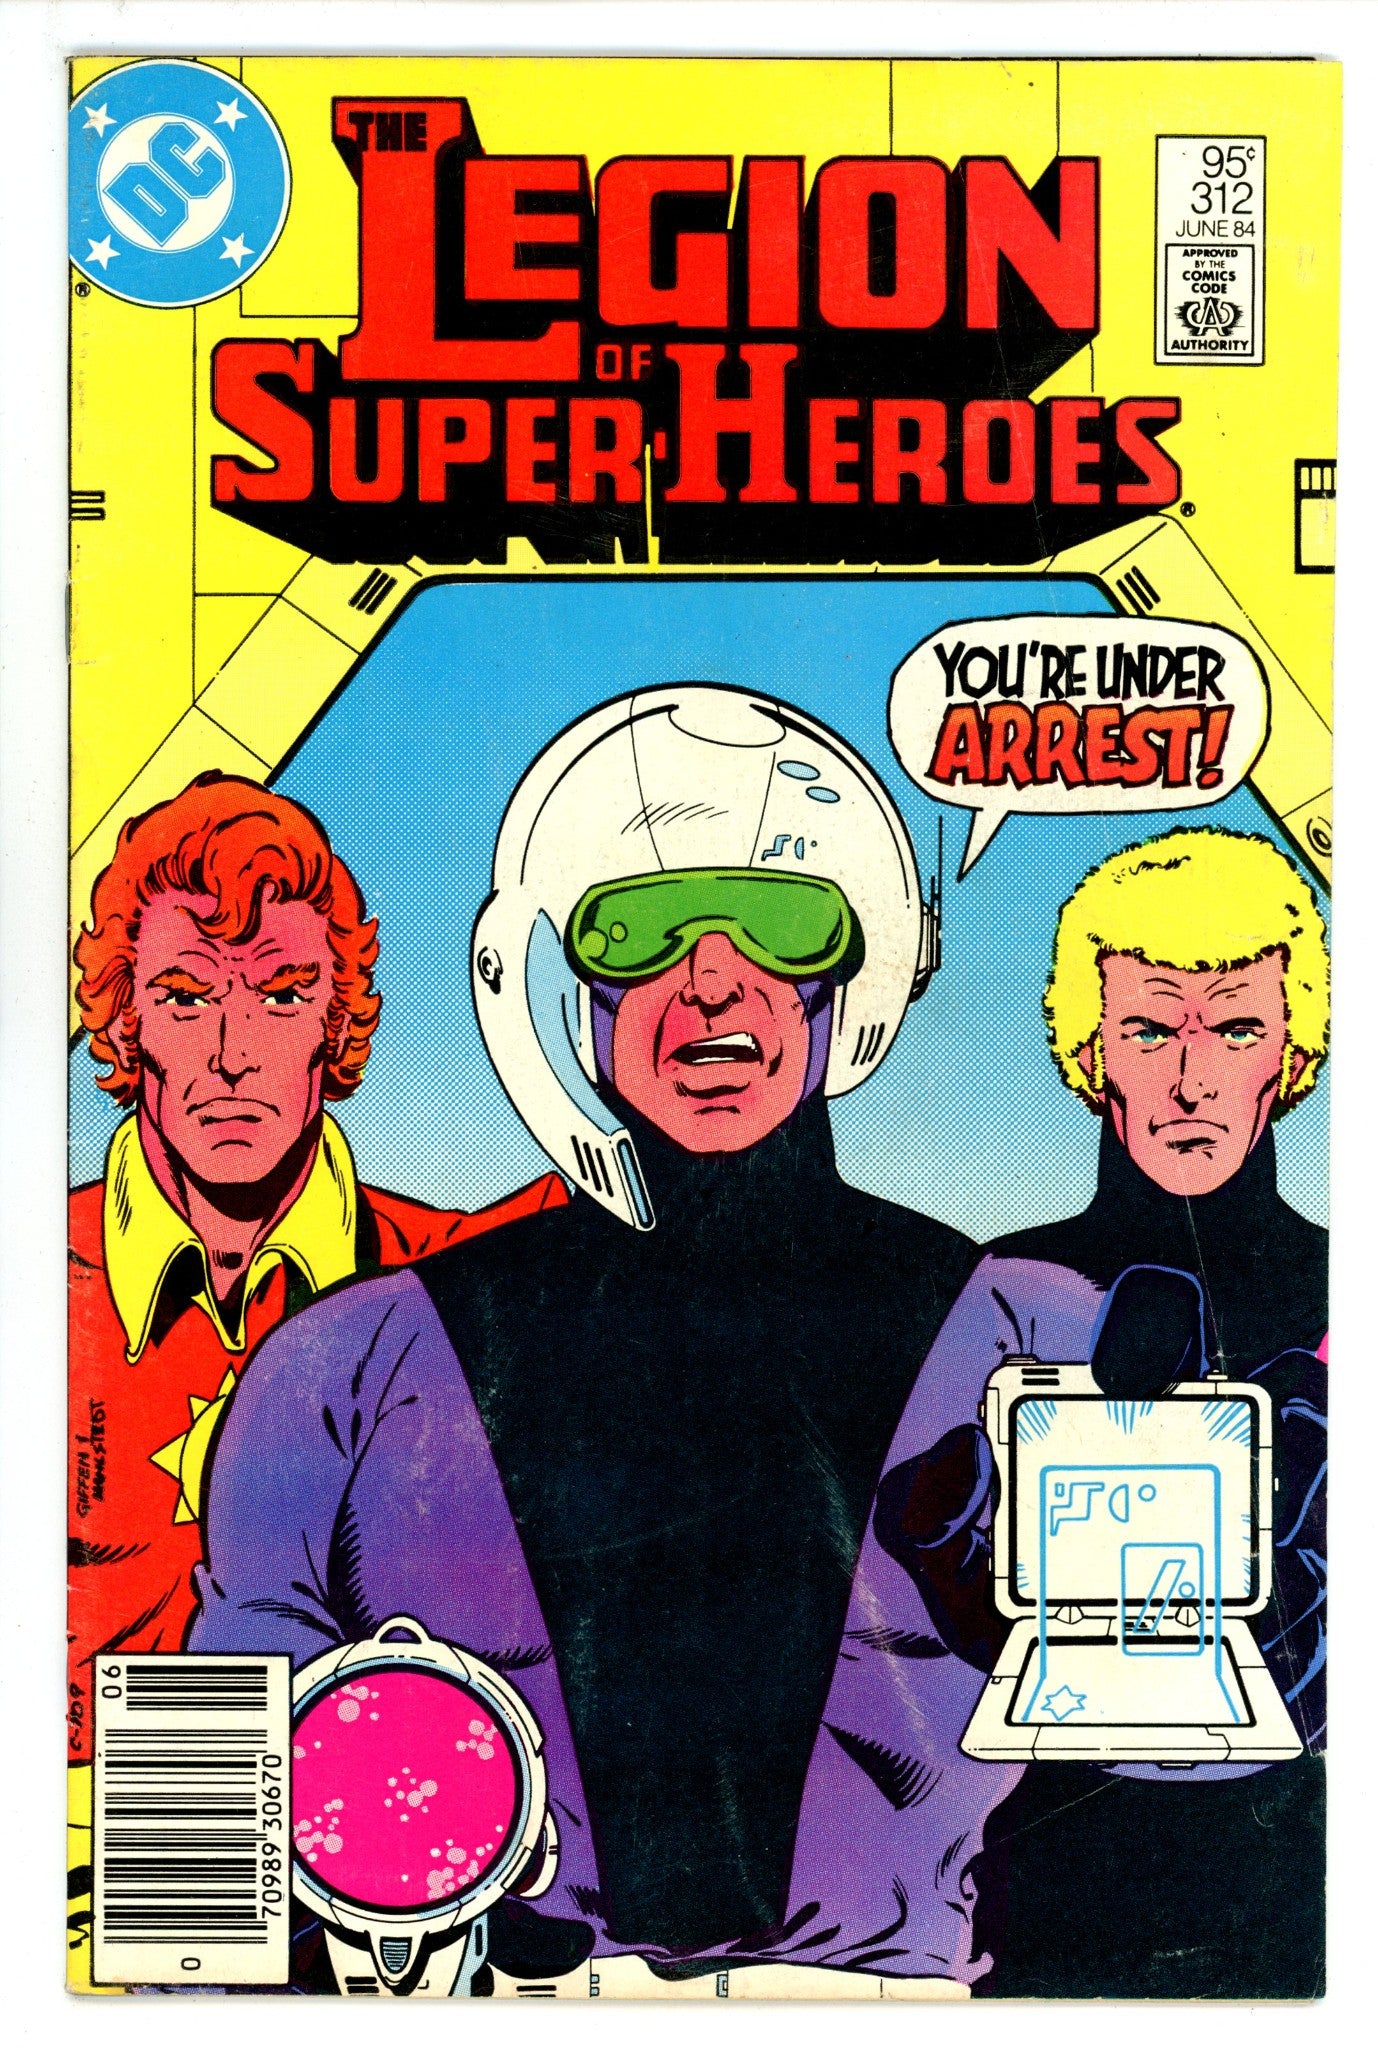 The Legion of Super-Heroes Vol 2 312 VG (4.0) (1984) Canadian Price Variant 